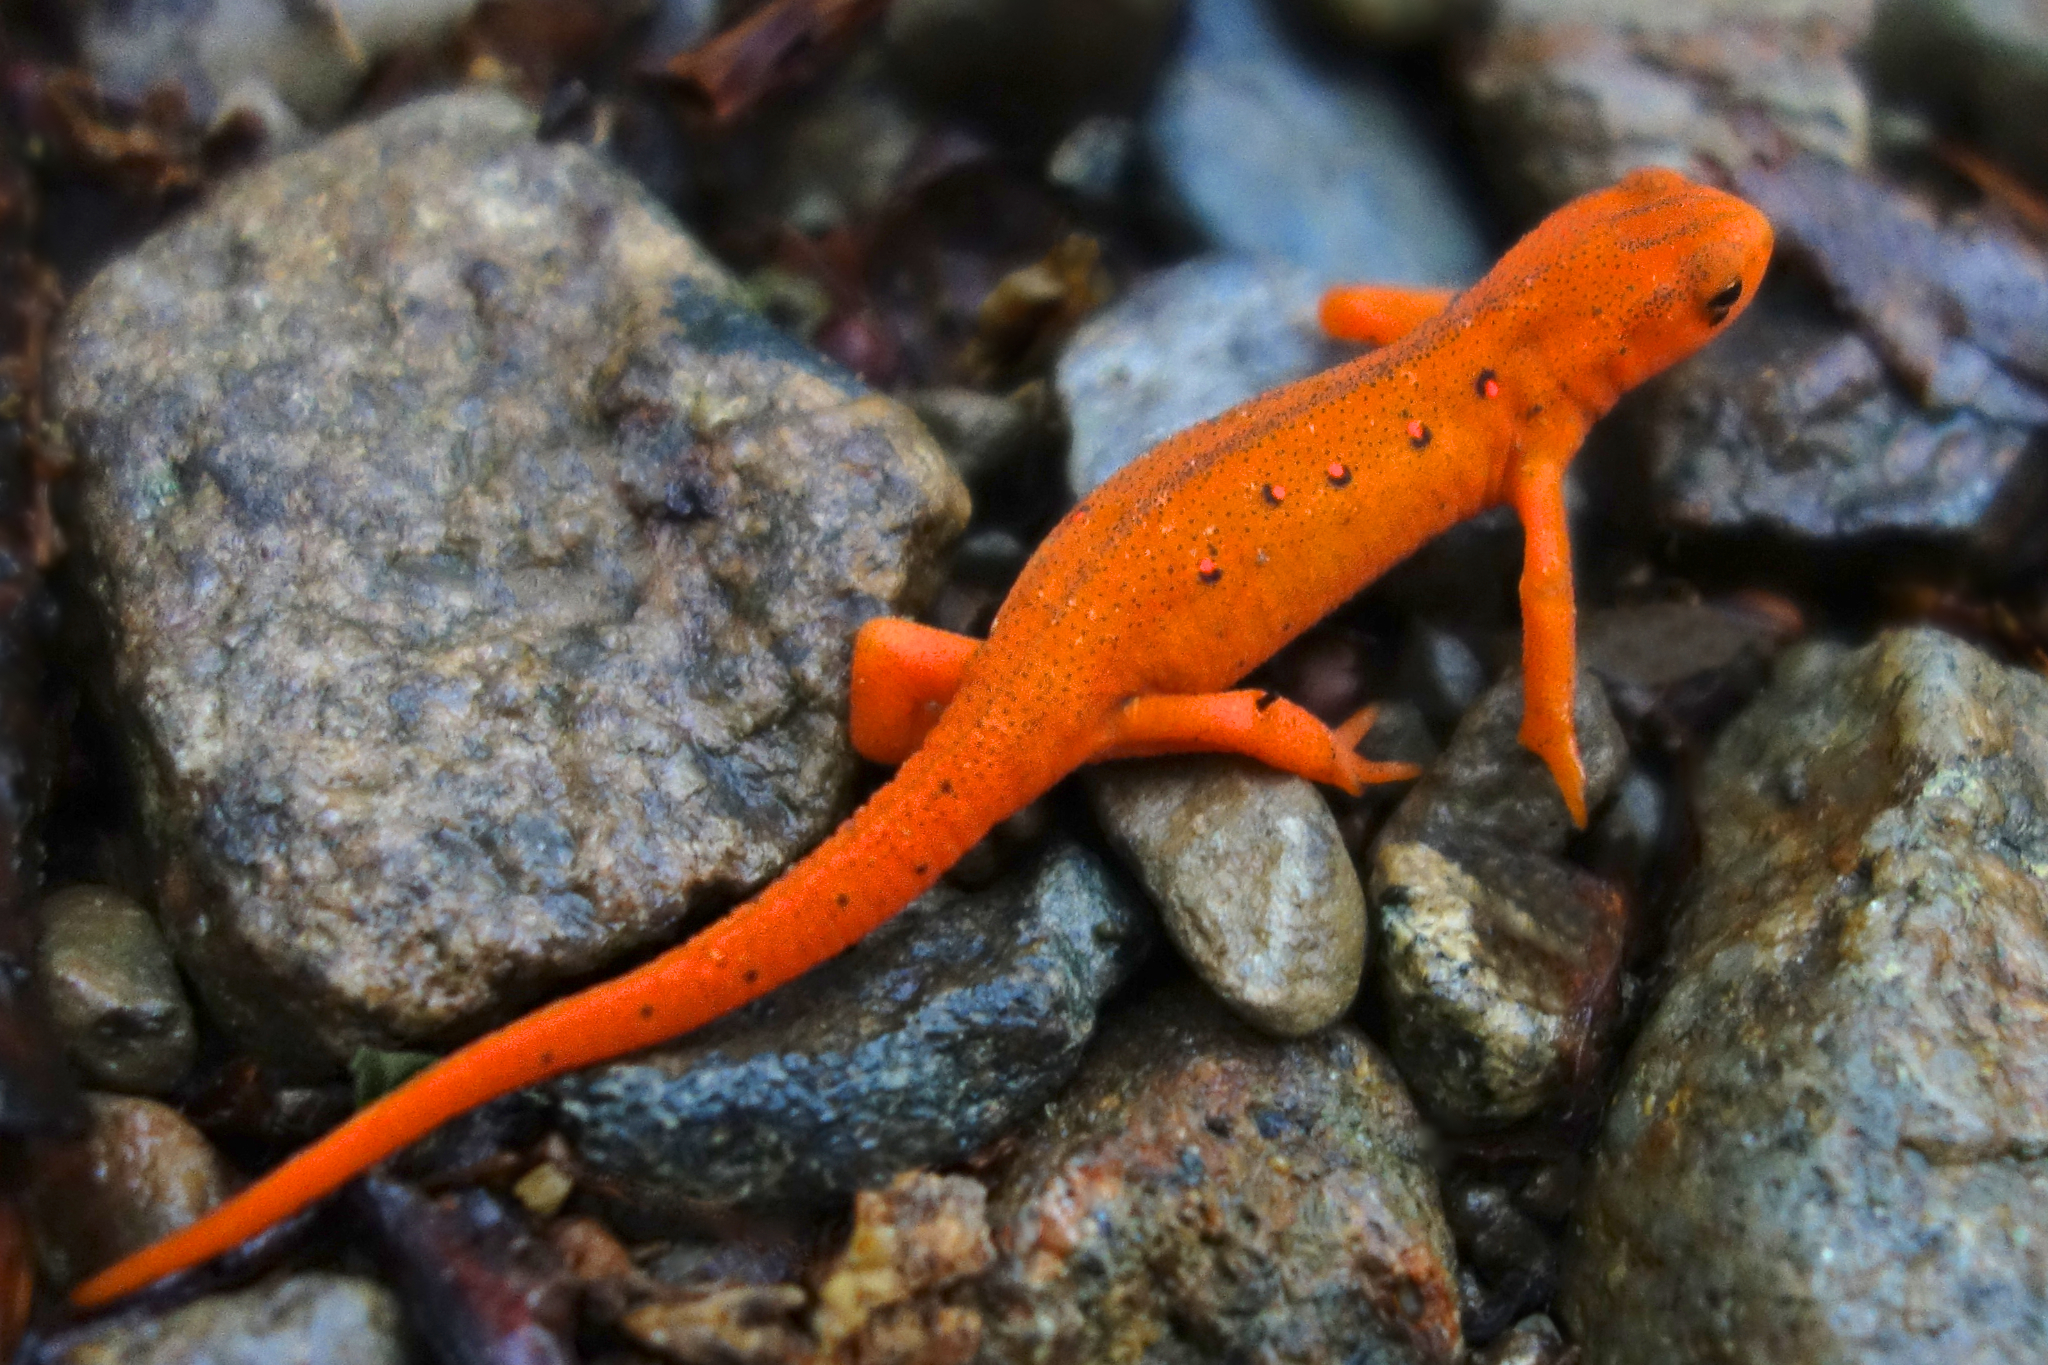 Red spotted newt photo